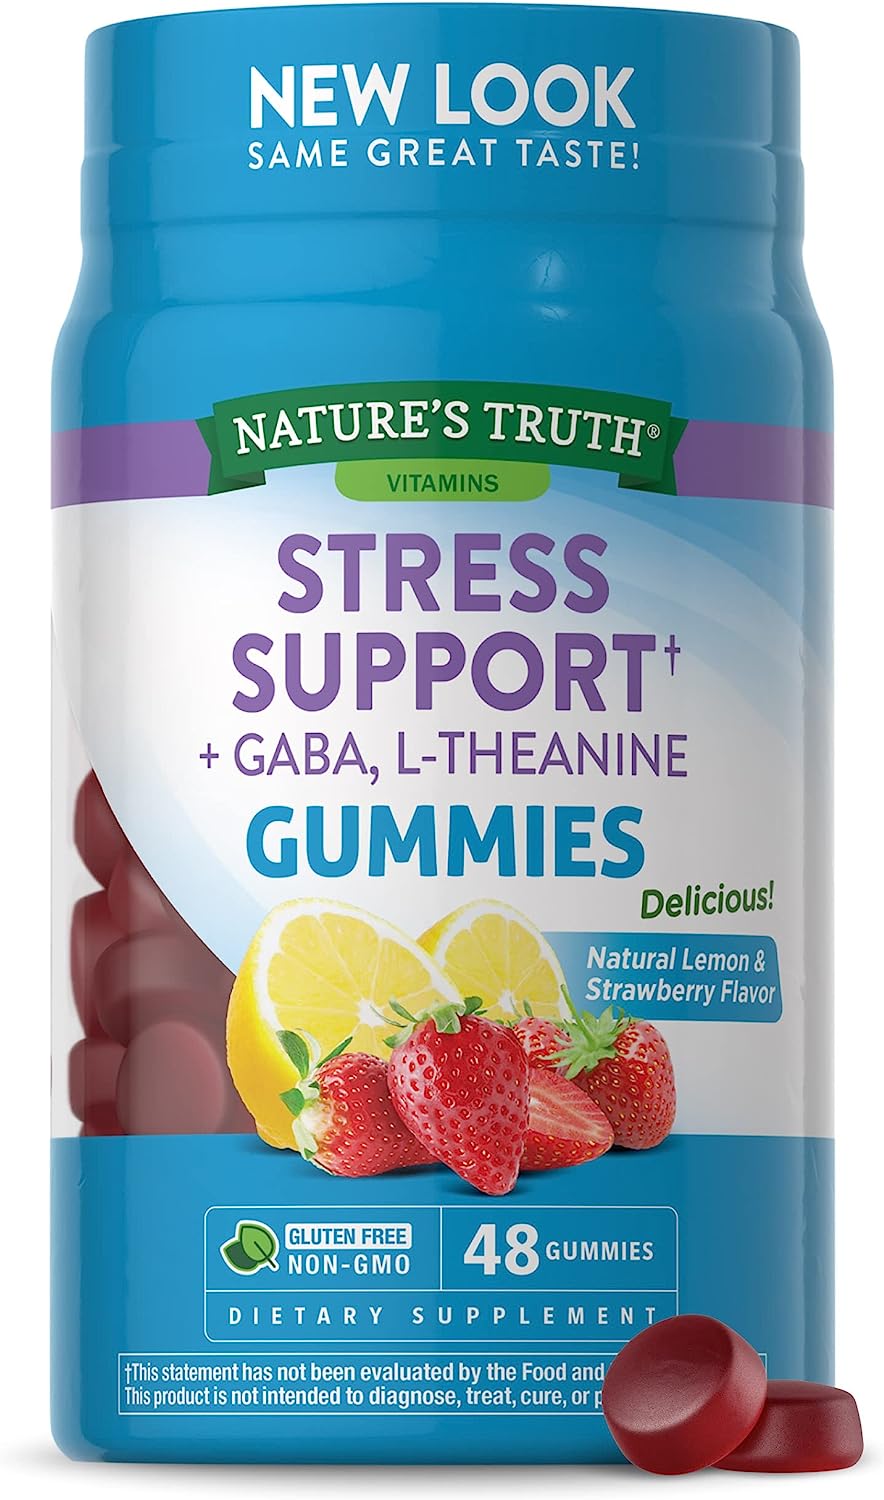 Stress Support+ with Gaba and L-Theanine